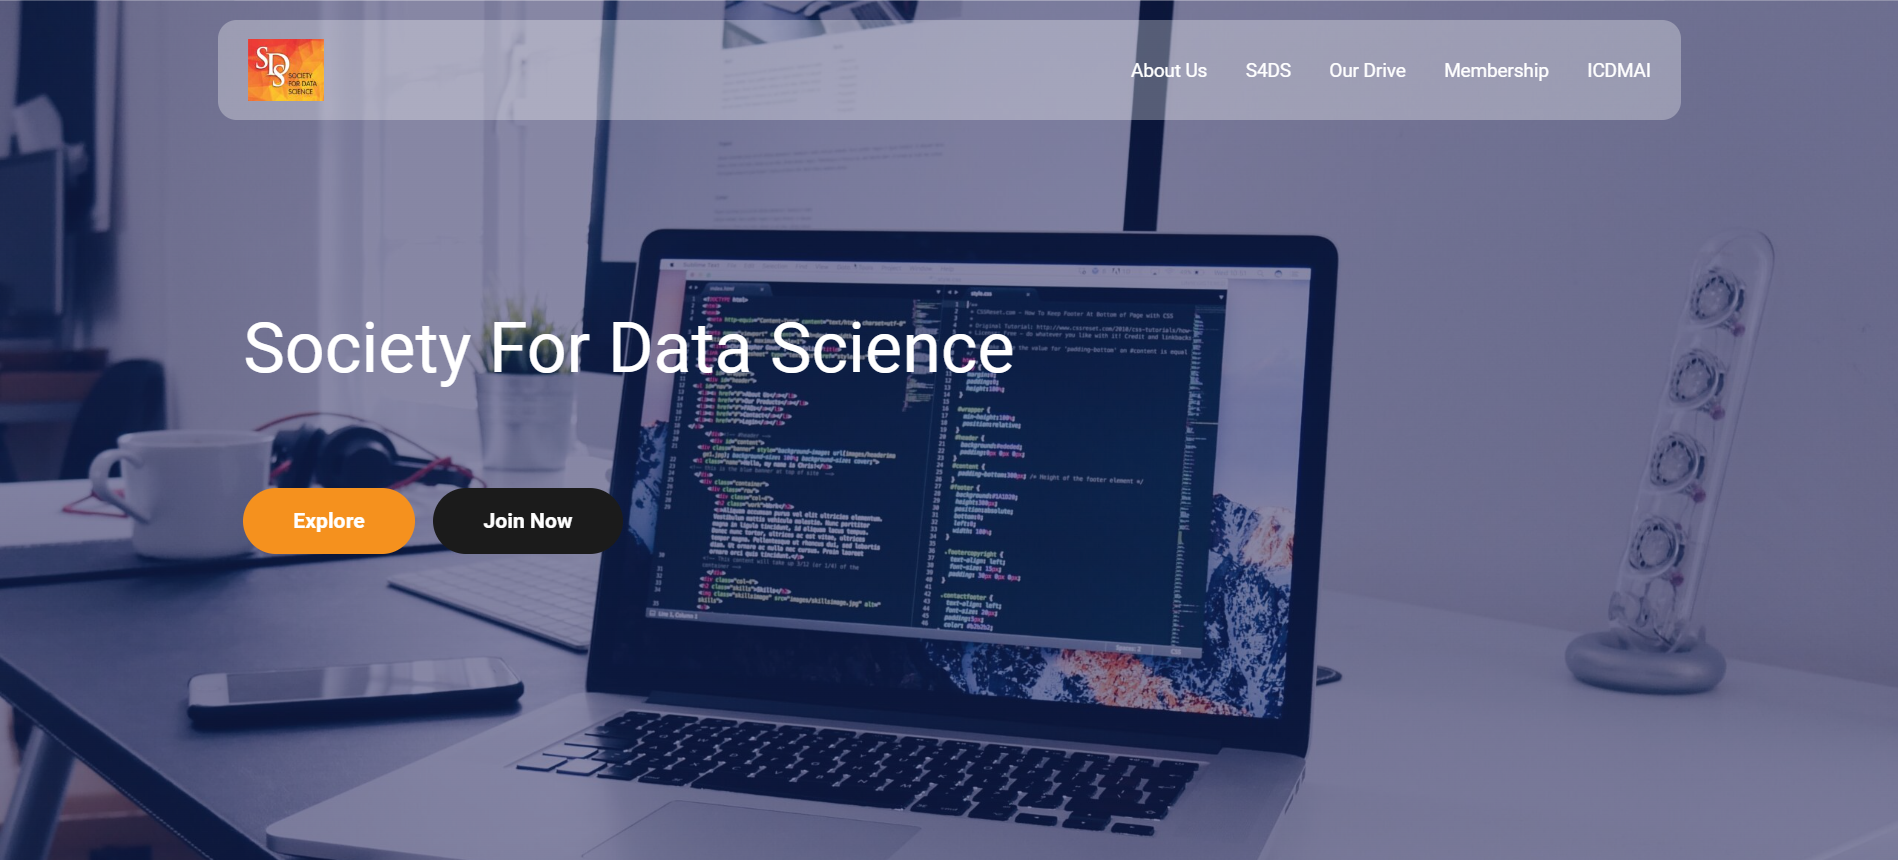 S4DS – Society For Data Science